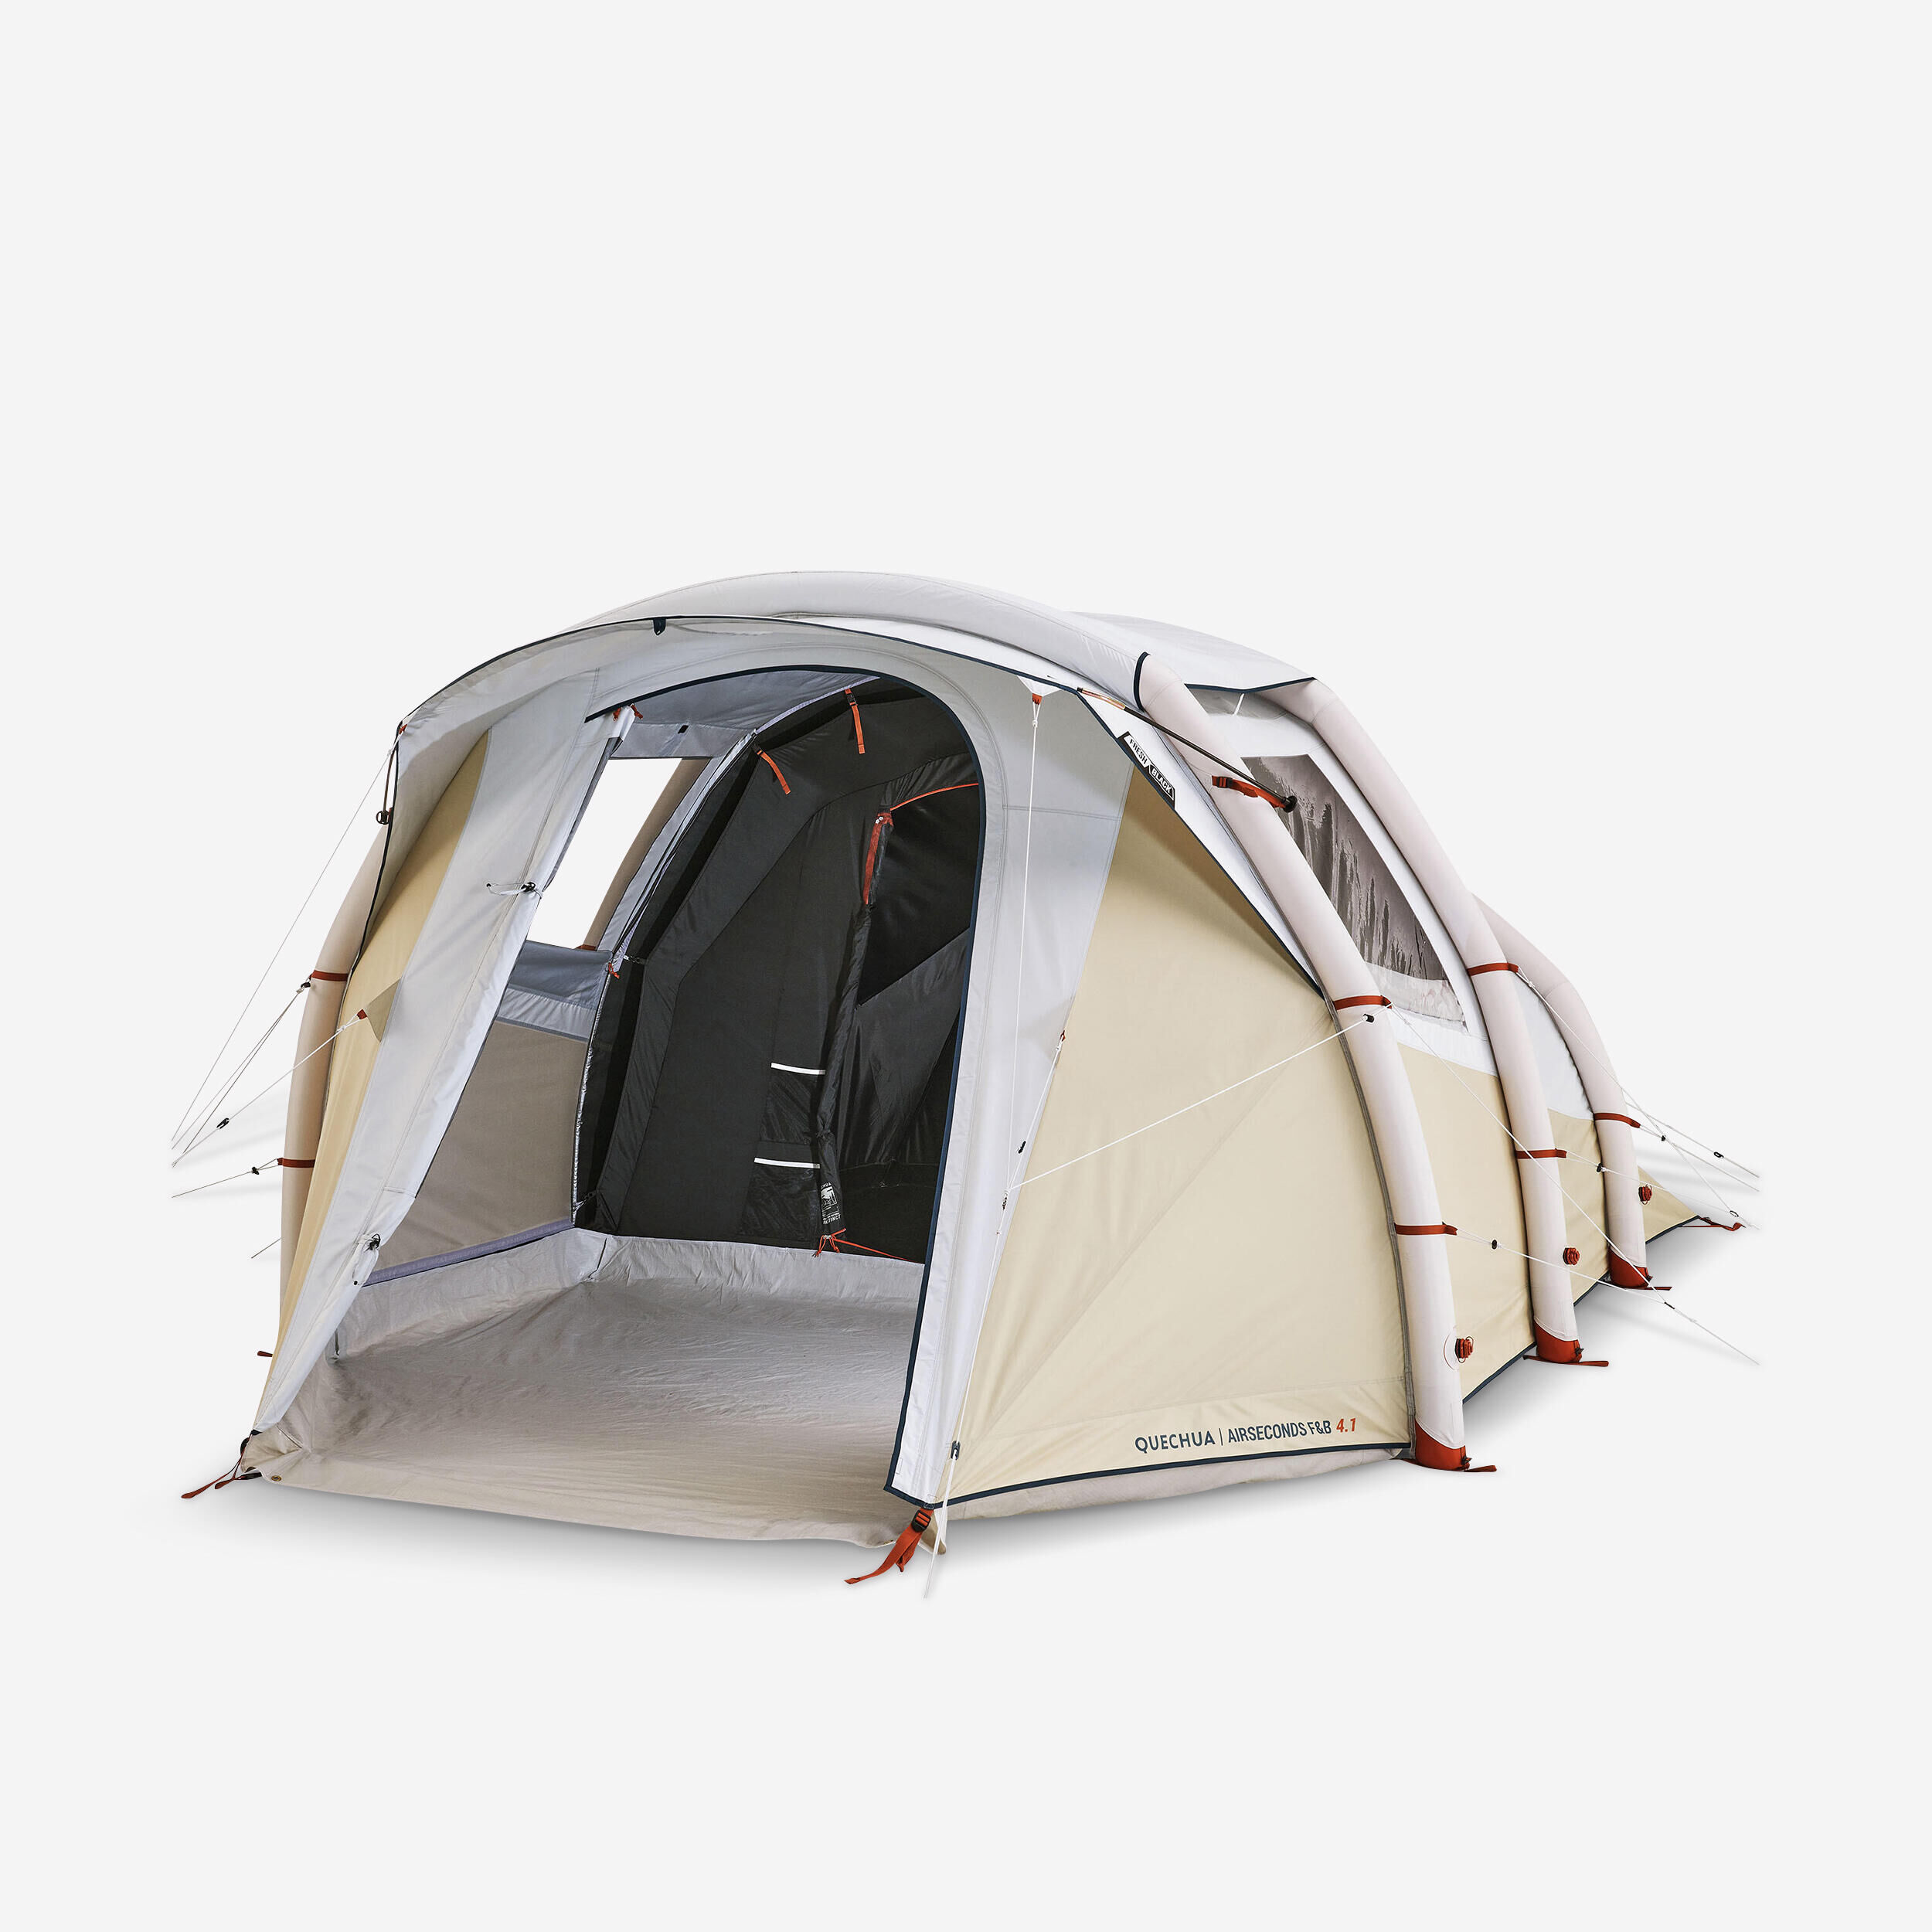 Tents - Camping Tents for Sale Now at Decathlon UK